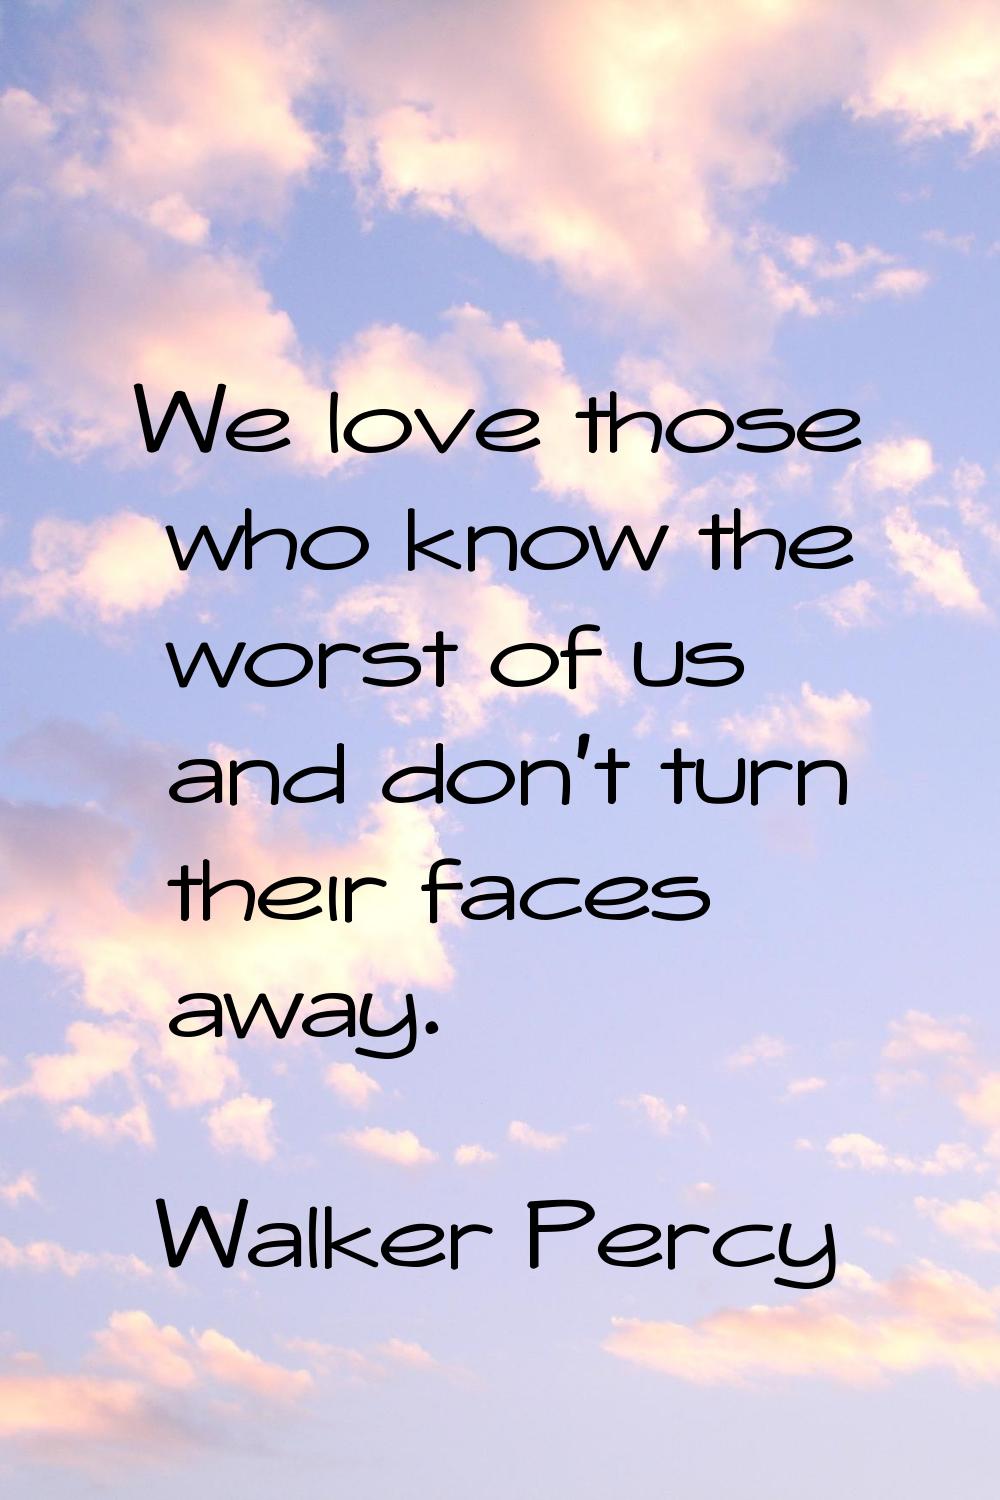 We love those who know the worst of us and don't turn their faces away.